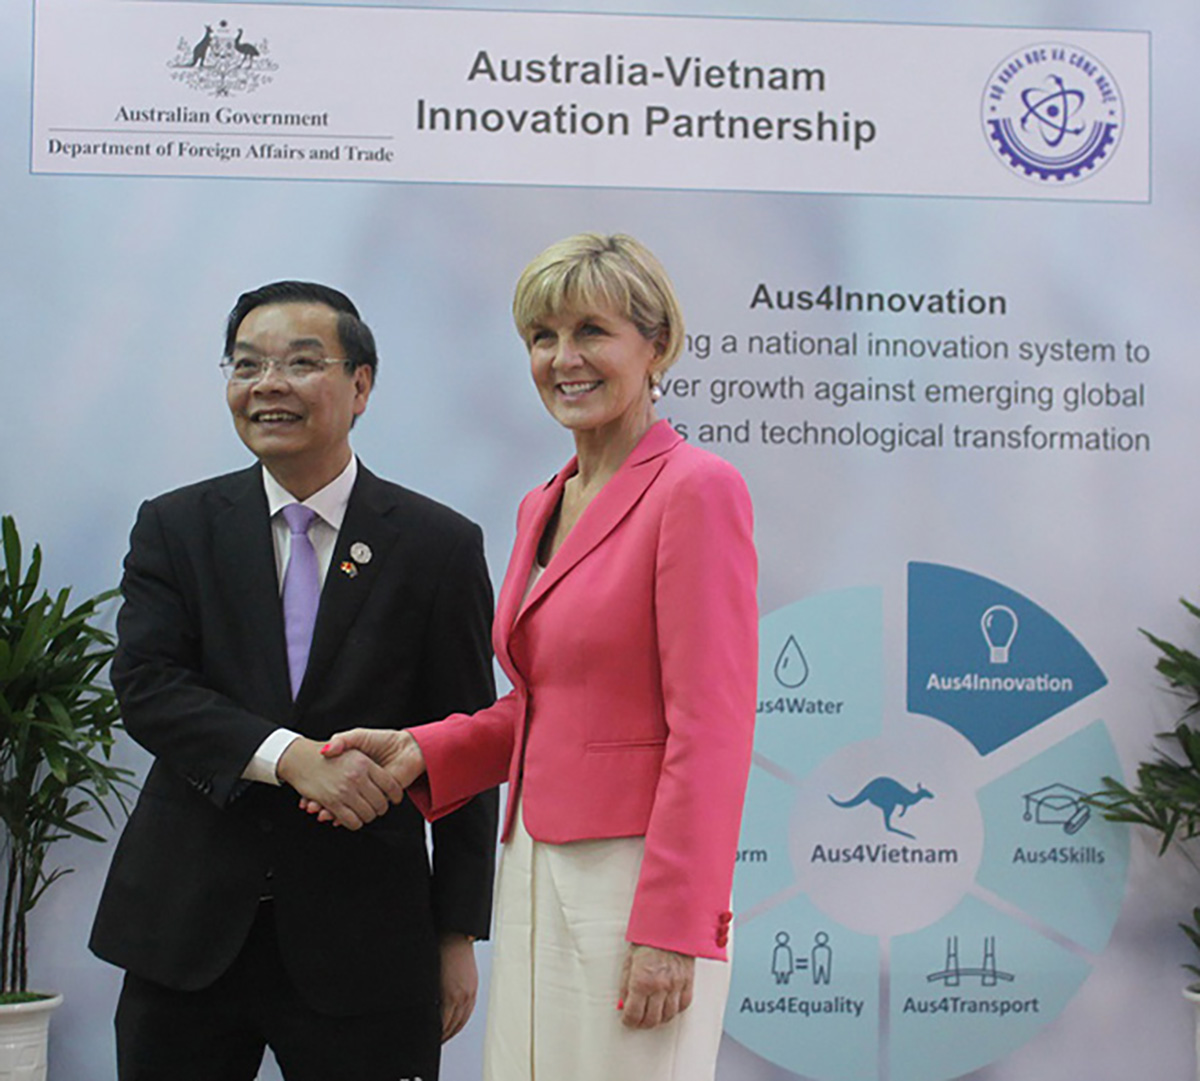 Former Australian Minister of Foreign Affairs and Trade Julie Bishop and Vietnamese Minister of Science and Technology Chu Ngoc Anh announced the Aus4Innovation program in 2017 during the week of APEC summit in Vietnam.